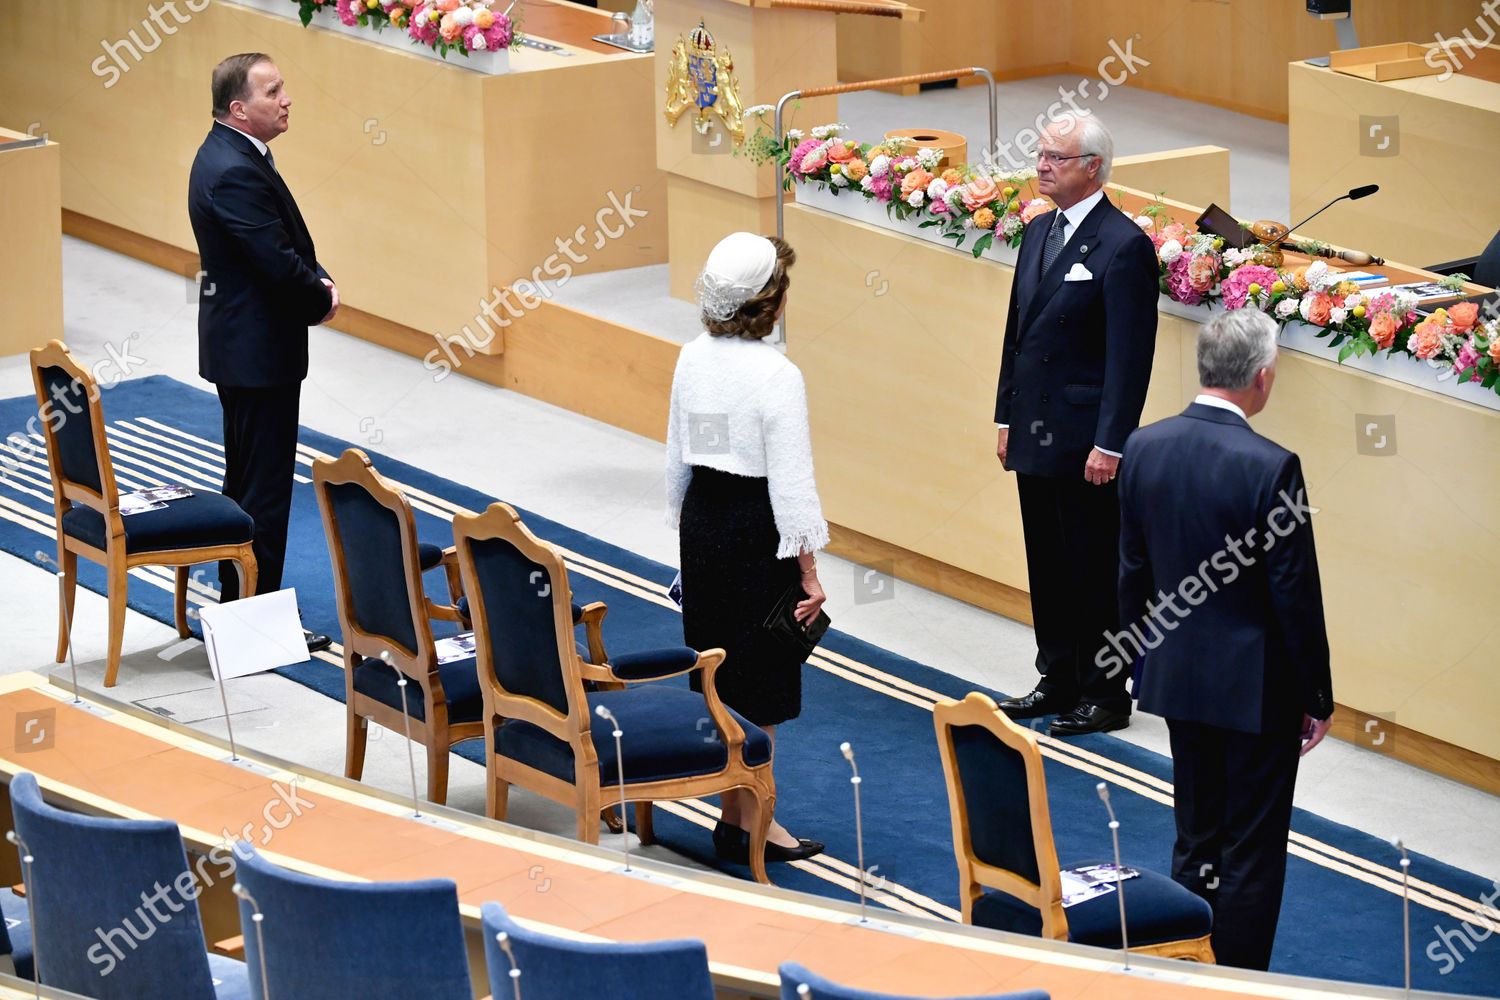 CASA REAL DE SUECIA - Página 63 Opening-of-the-parliamentary-session-stockholm-cathedral-stockholm-sweden-shutterstock-editorial-10769598ah